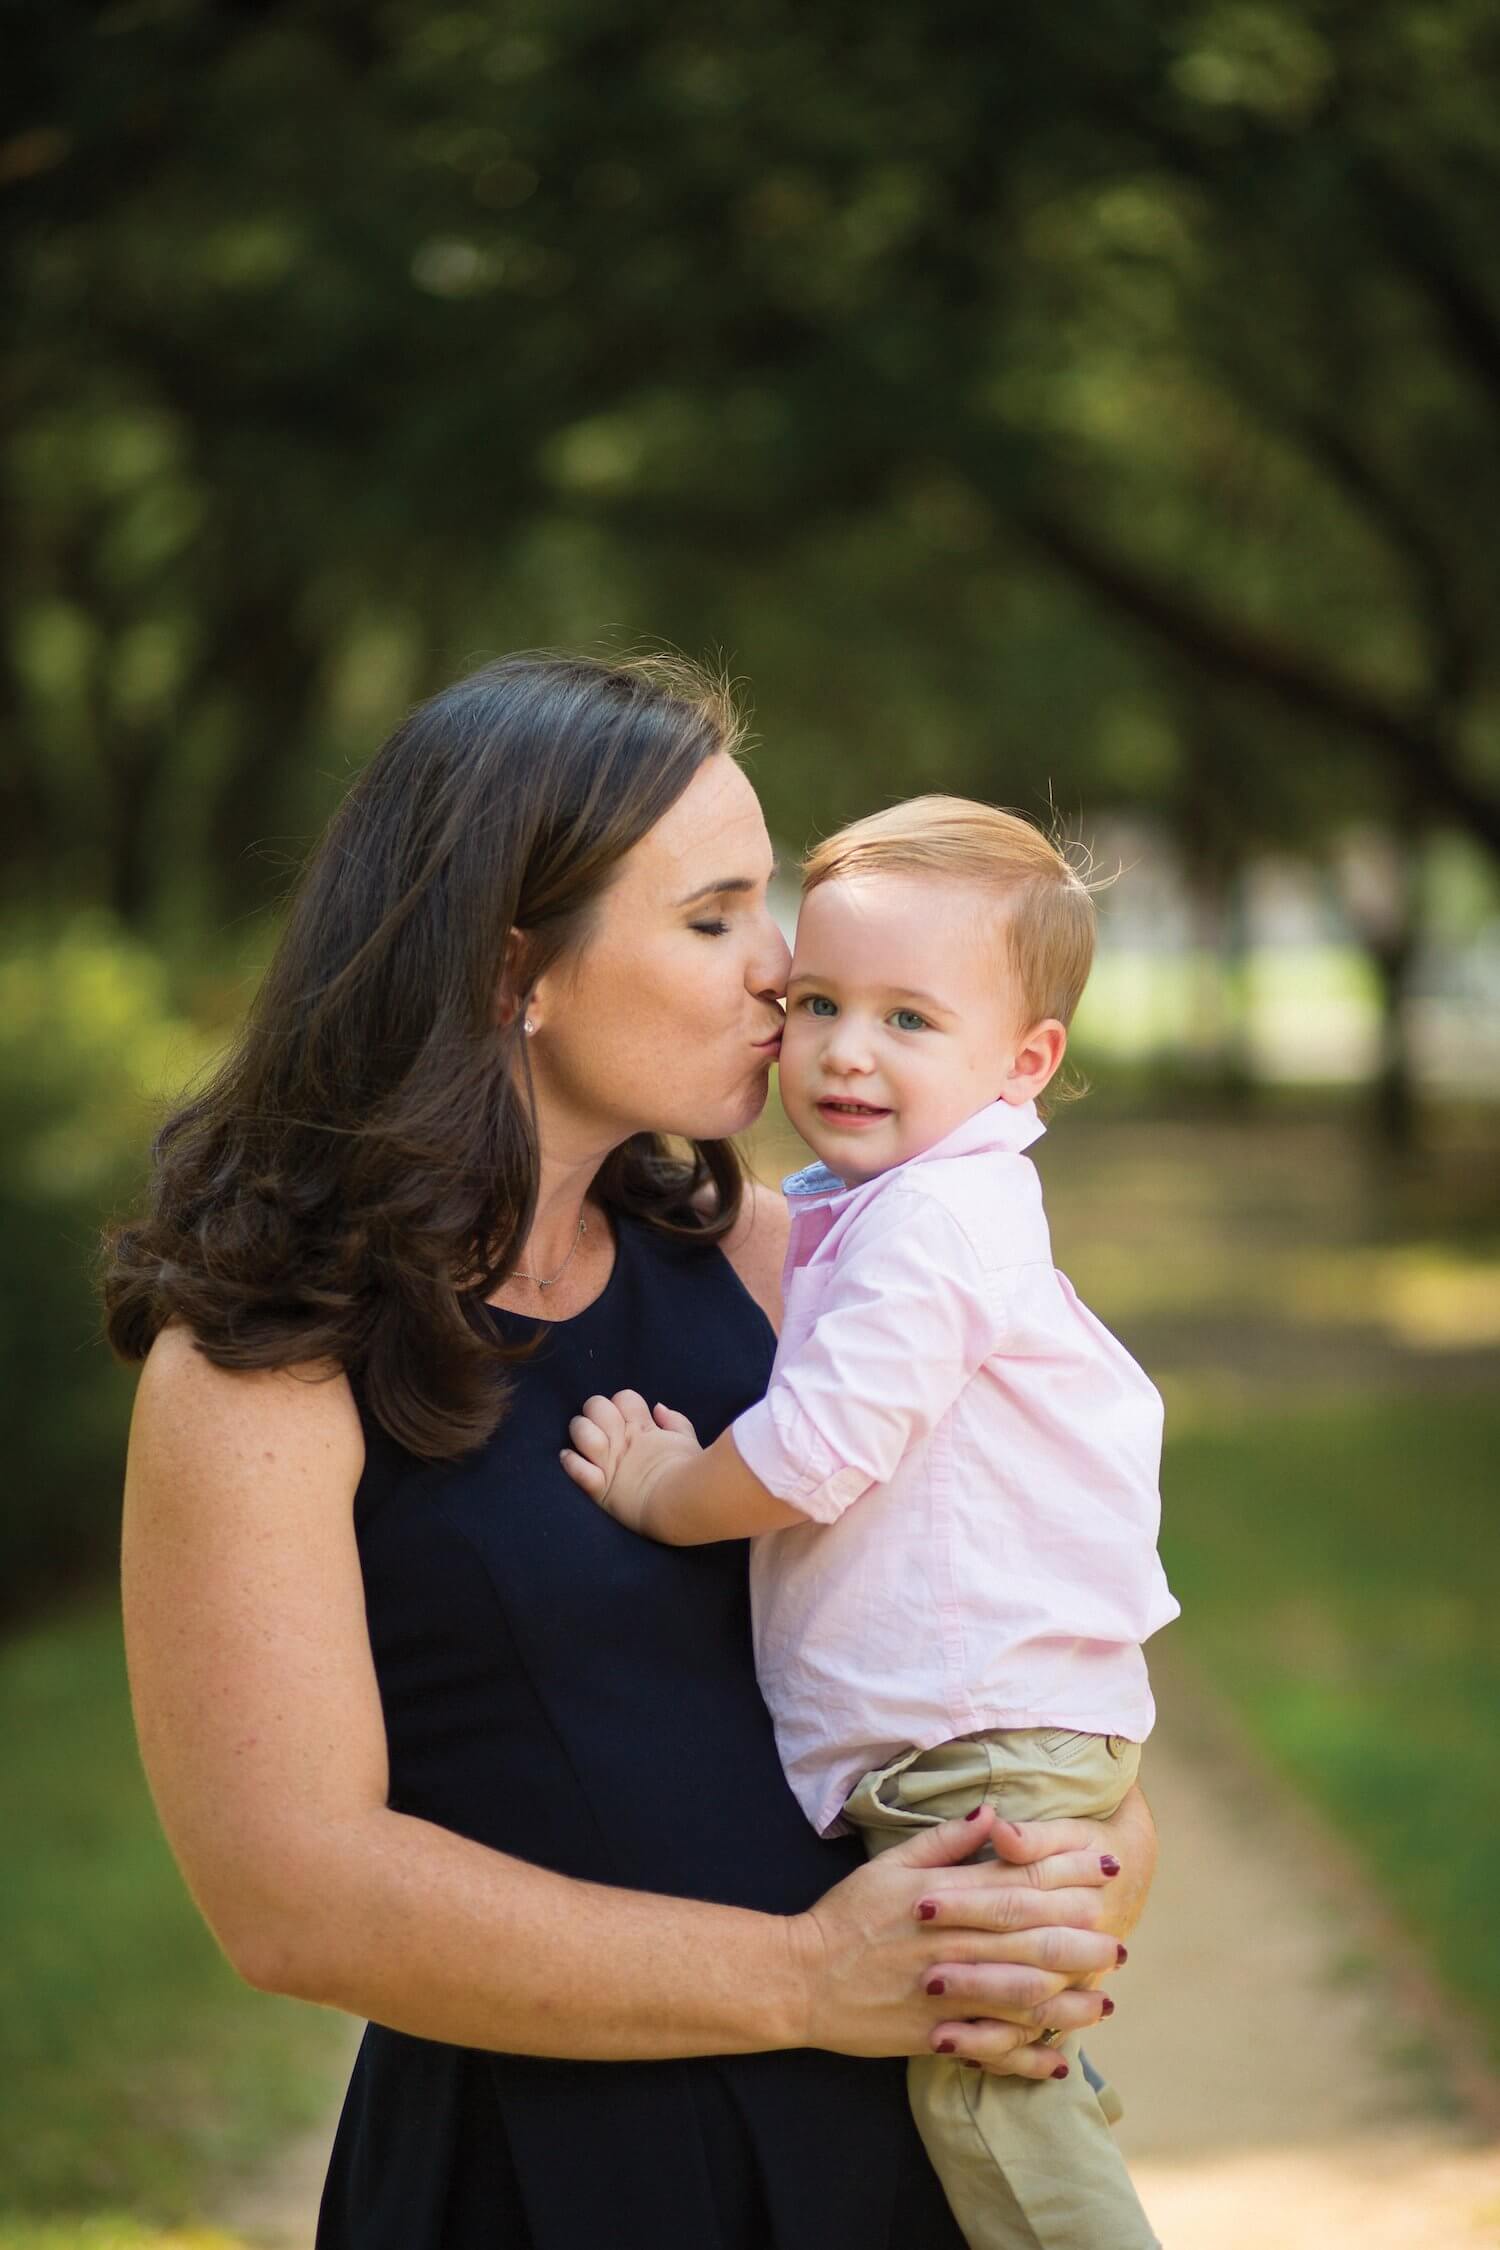 Molly Hackett LaFauci plants a kiss on her youngest child, J.J.